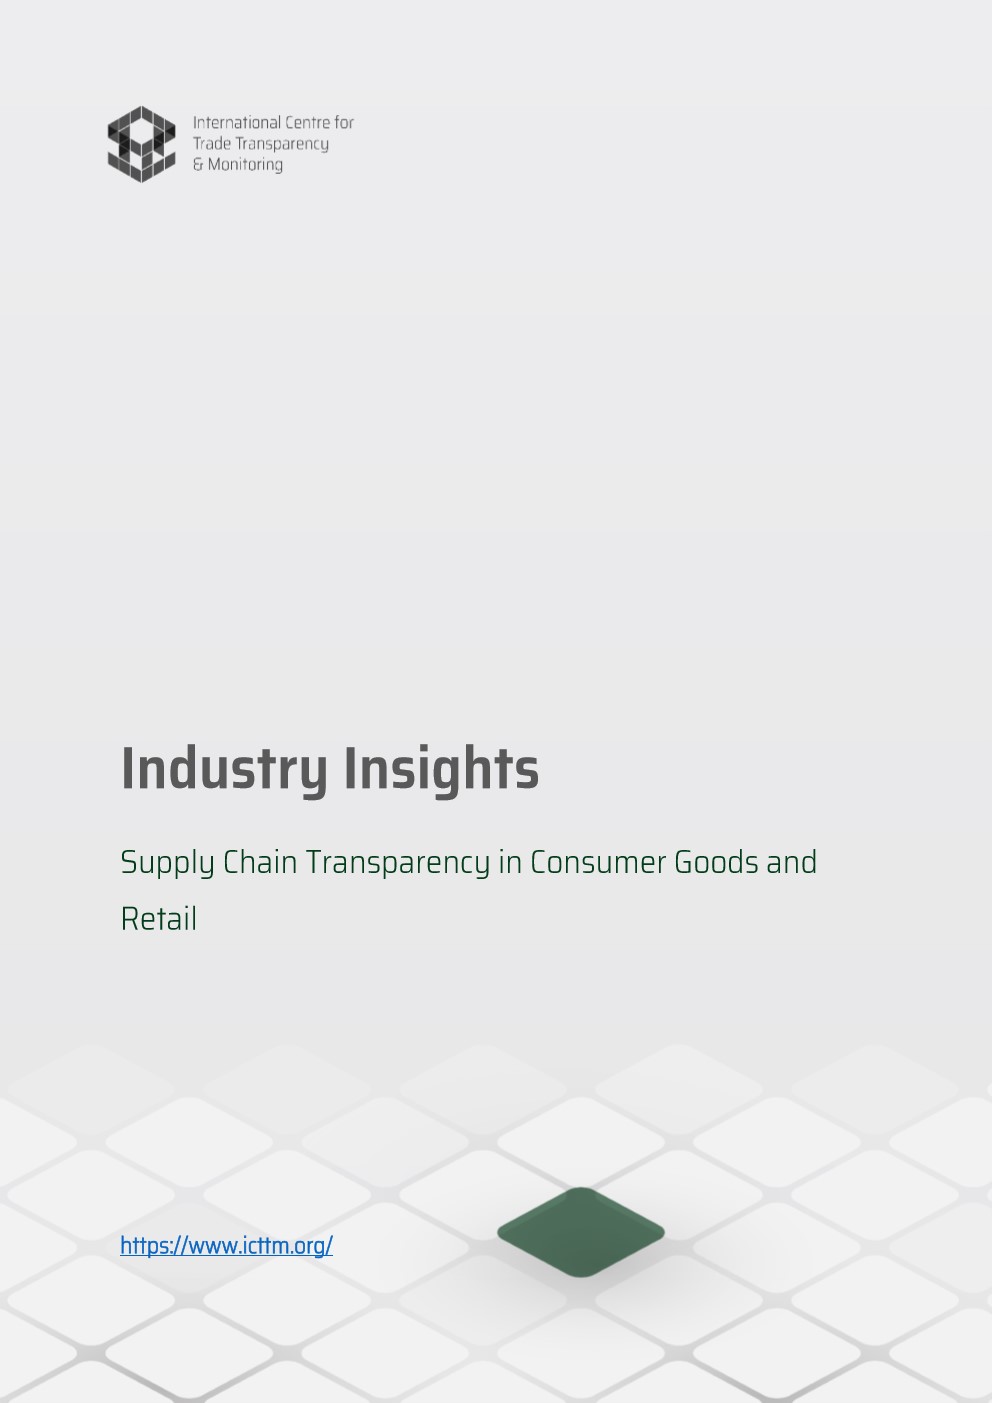 Supply Chain Transparency in Consumer Goods and Retail